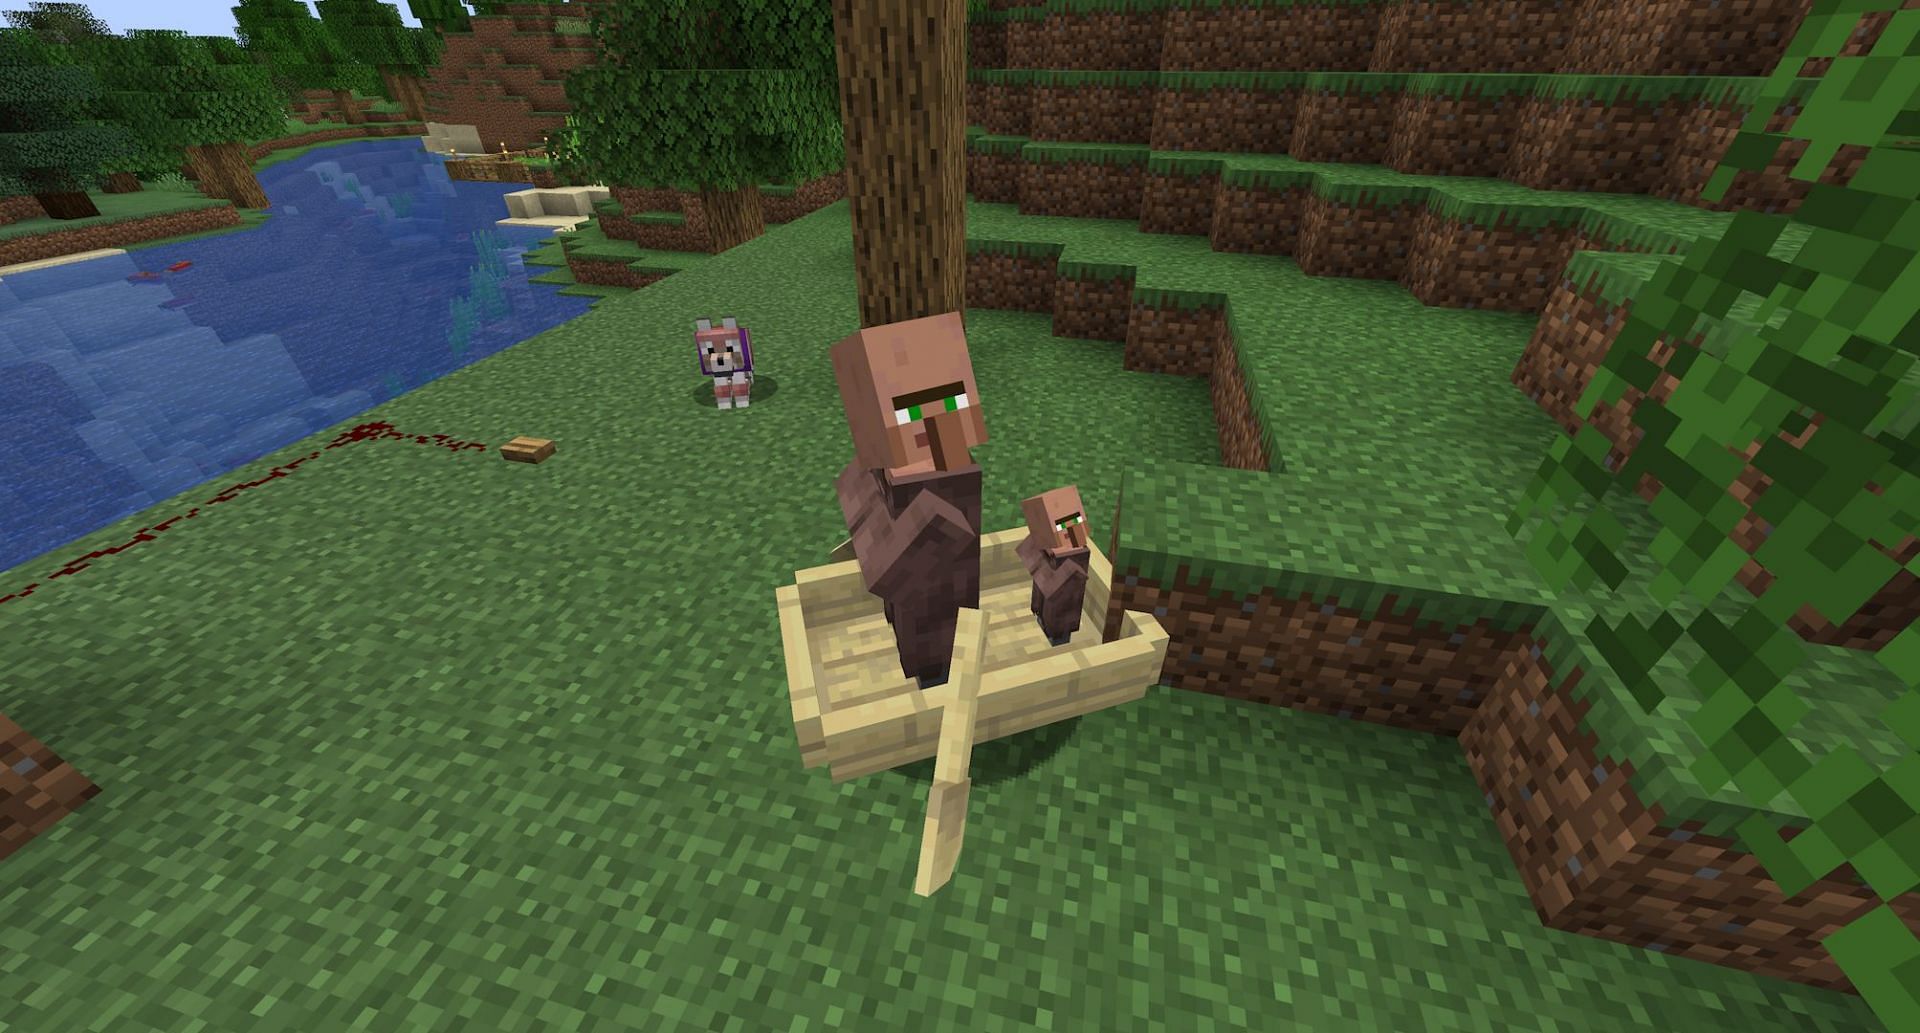 Two villagers sitting in a boat (Image via Mojang)